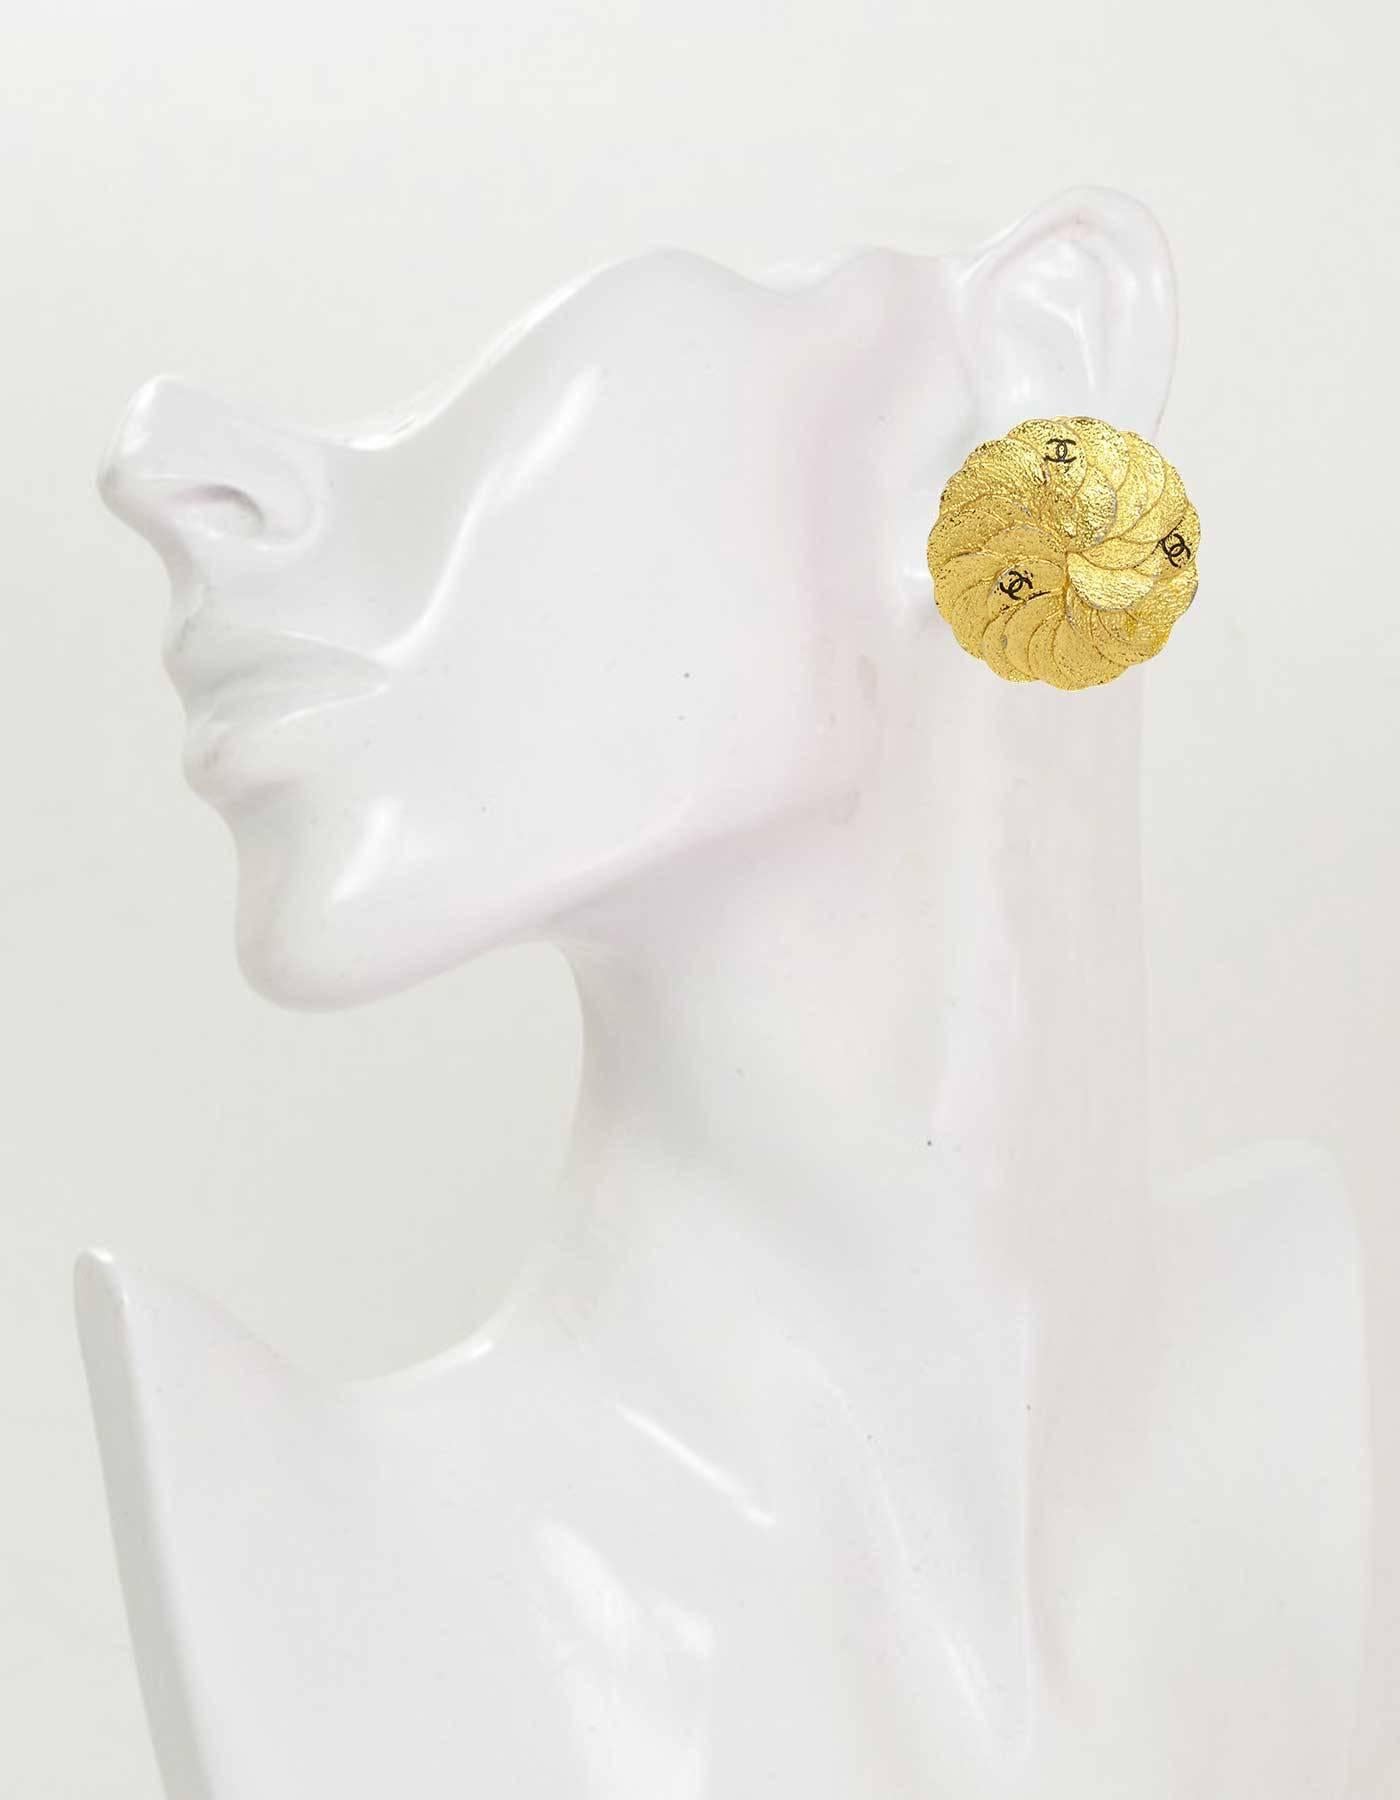 CHANEL Vintage '87 Textured Gold Disc Clip On Earrings 1